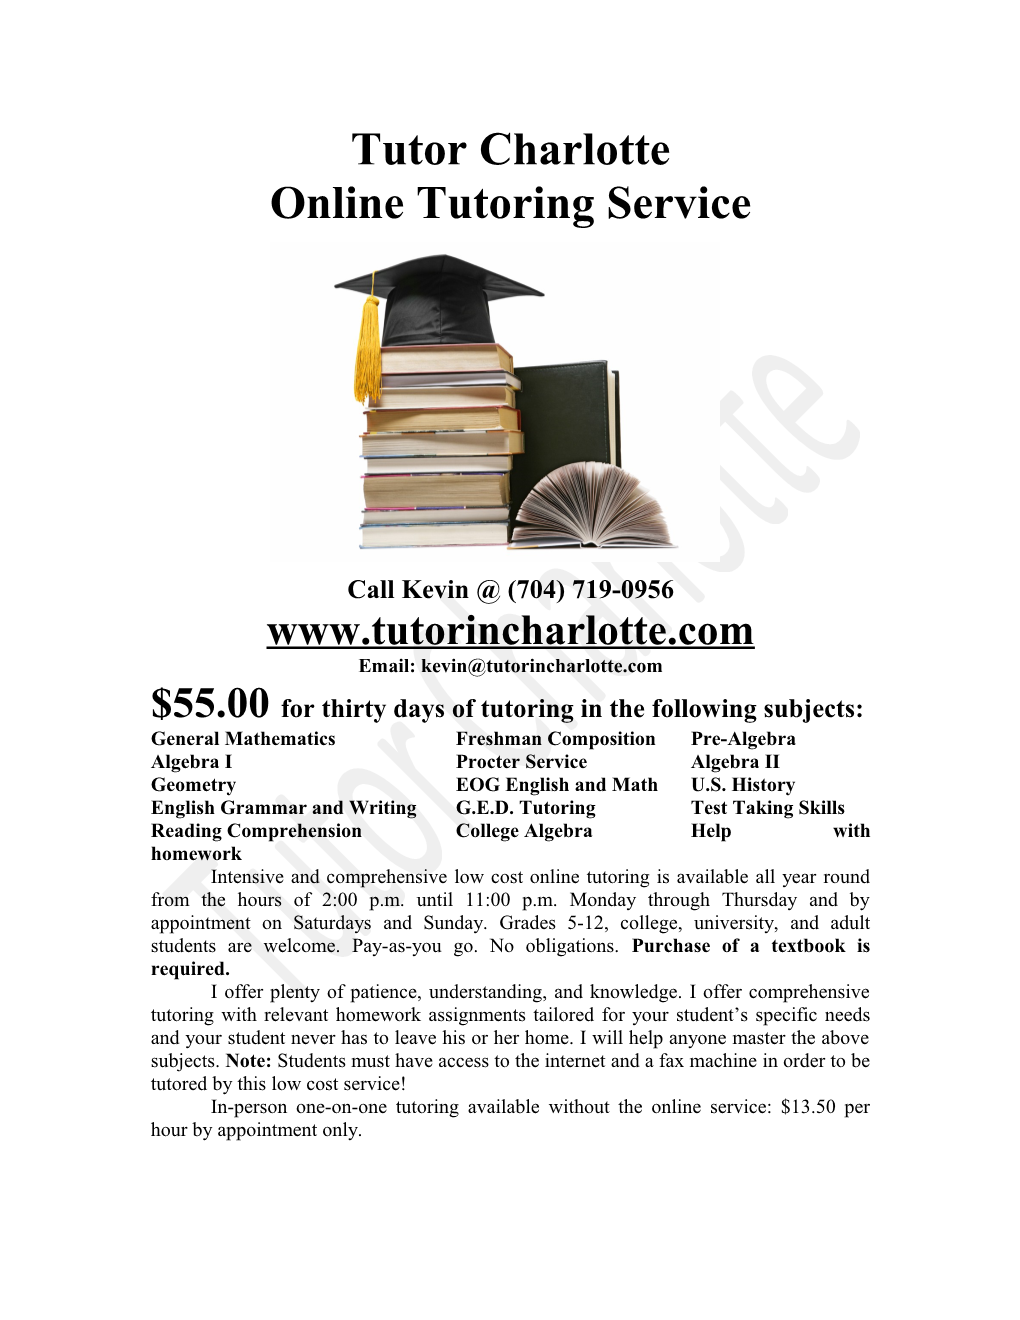 $55.00 for Thirty Days of Tutoring in the Following Subjects